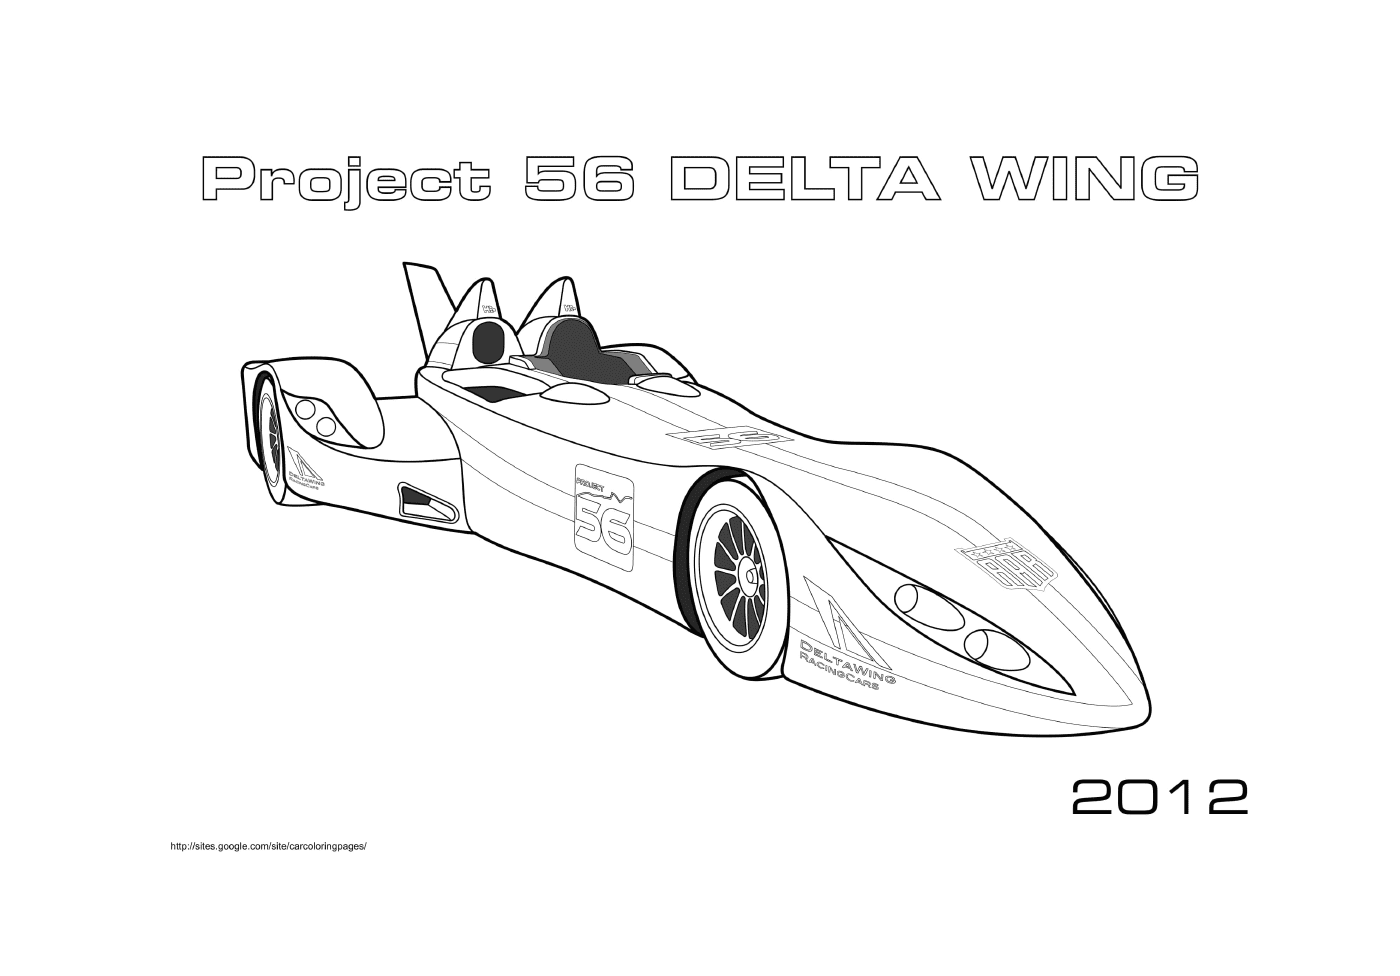   Project 56 Delta Wing 2012 